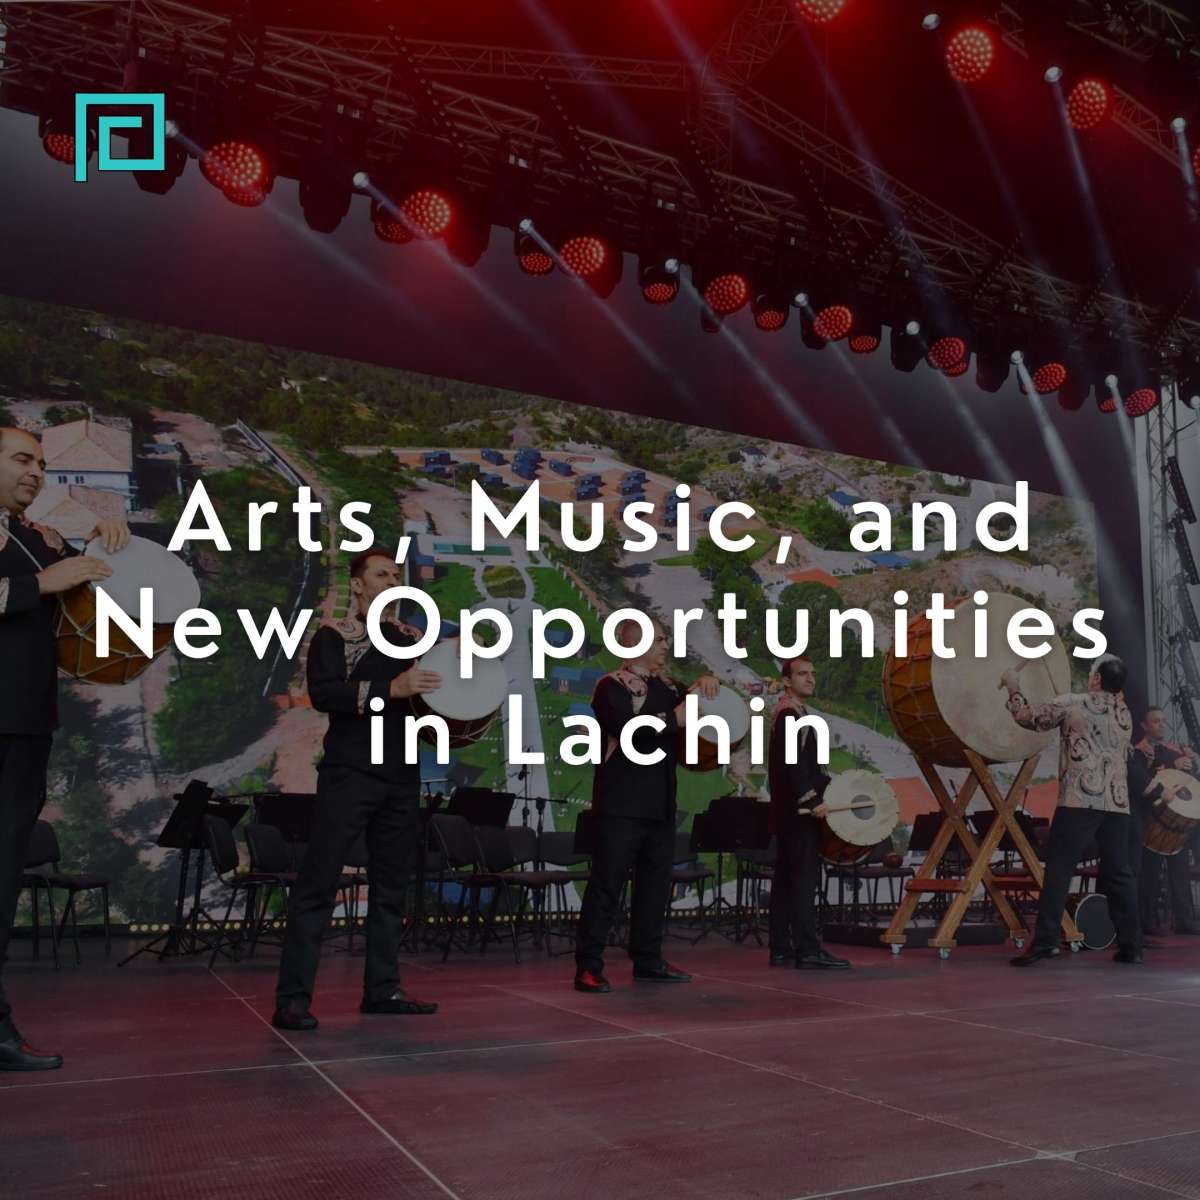 Arts, music, and new opportunities in Lachin